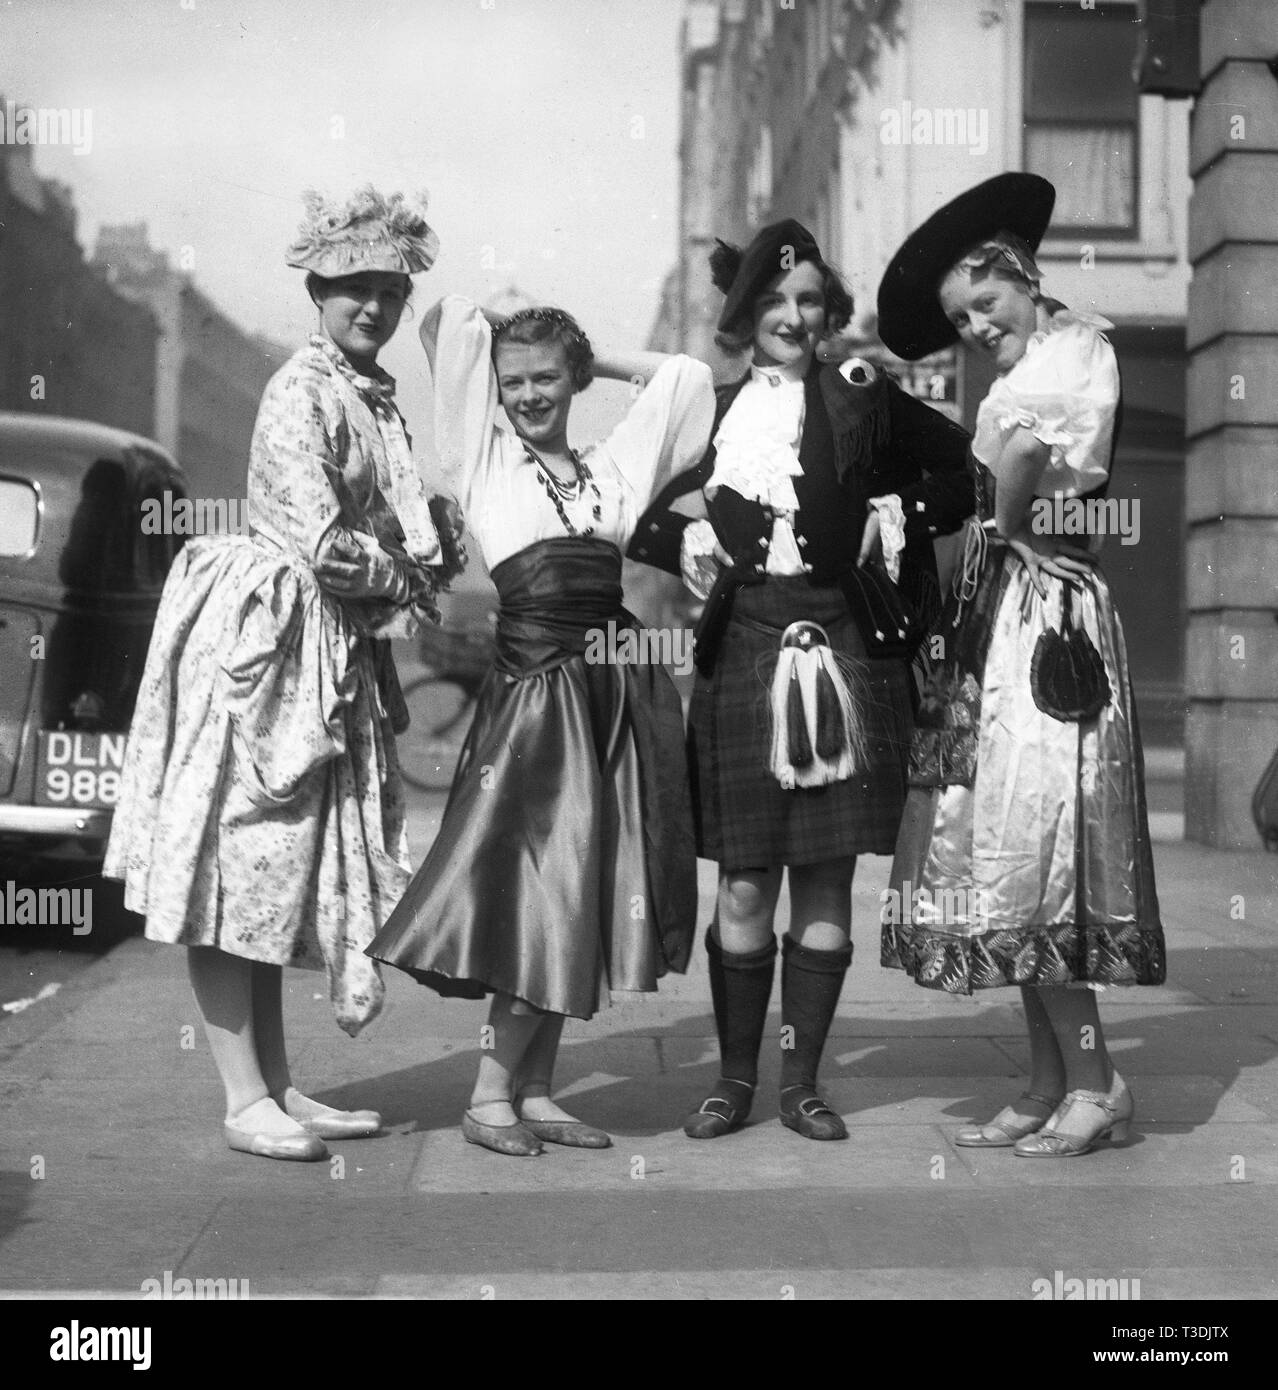 London theatre actress girls in costume 1948 Stock Photo